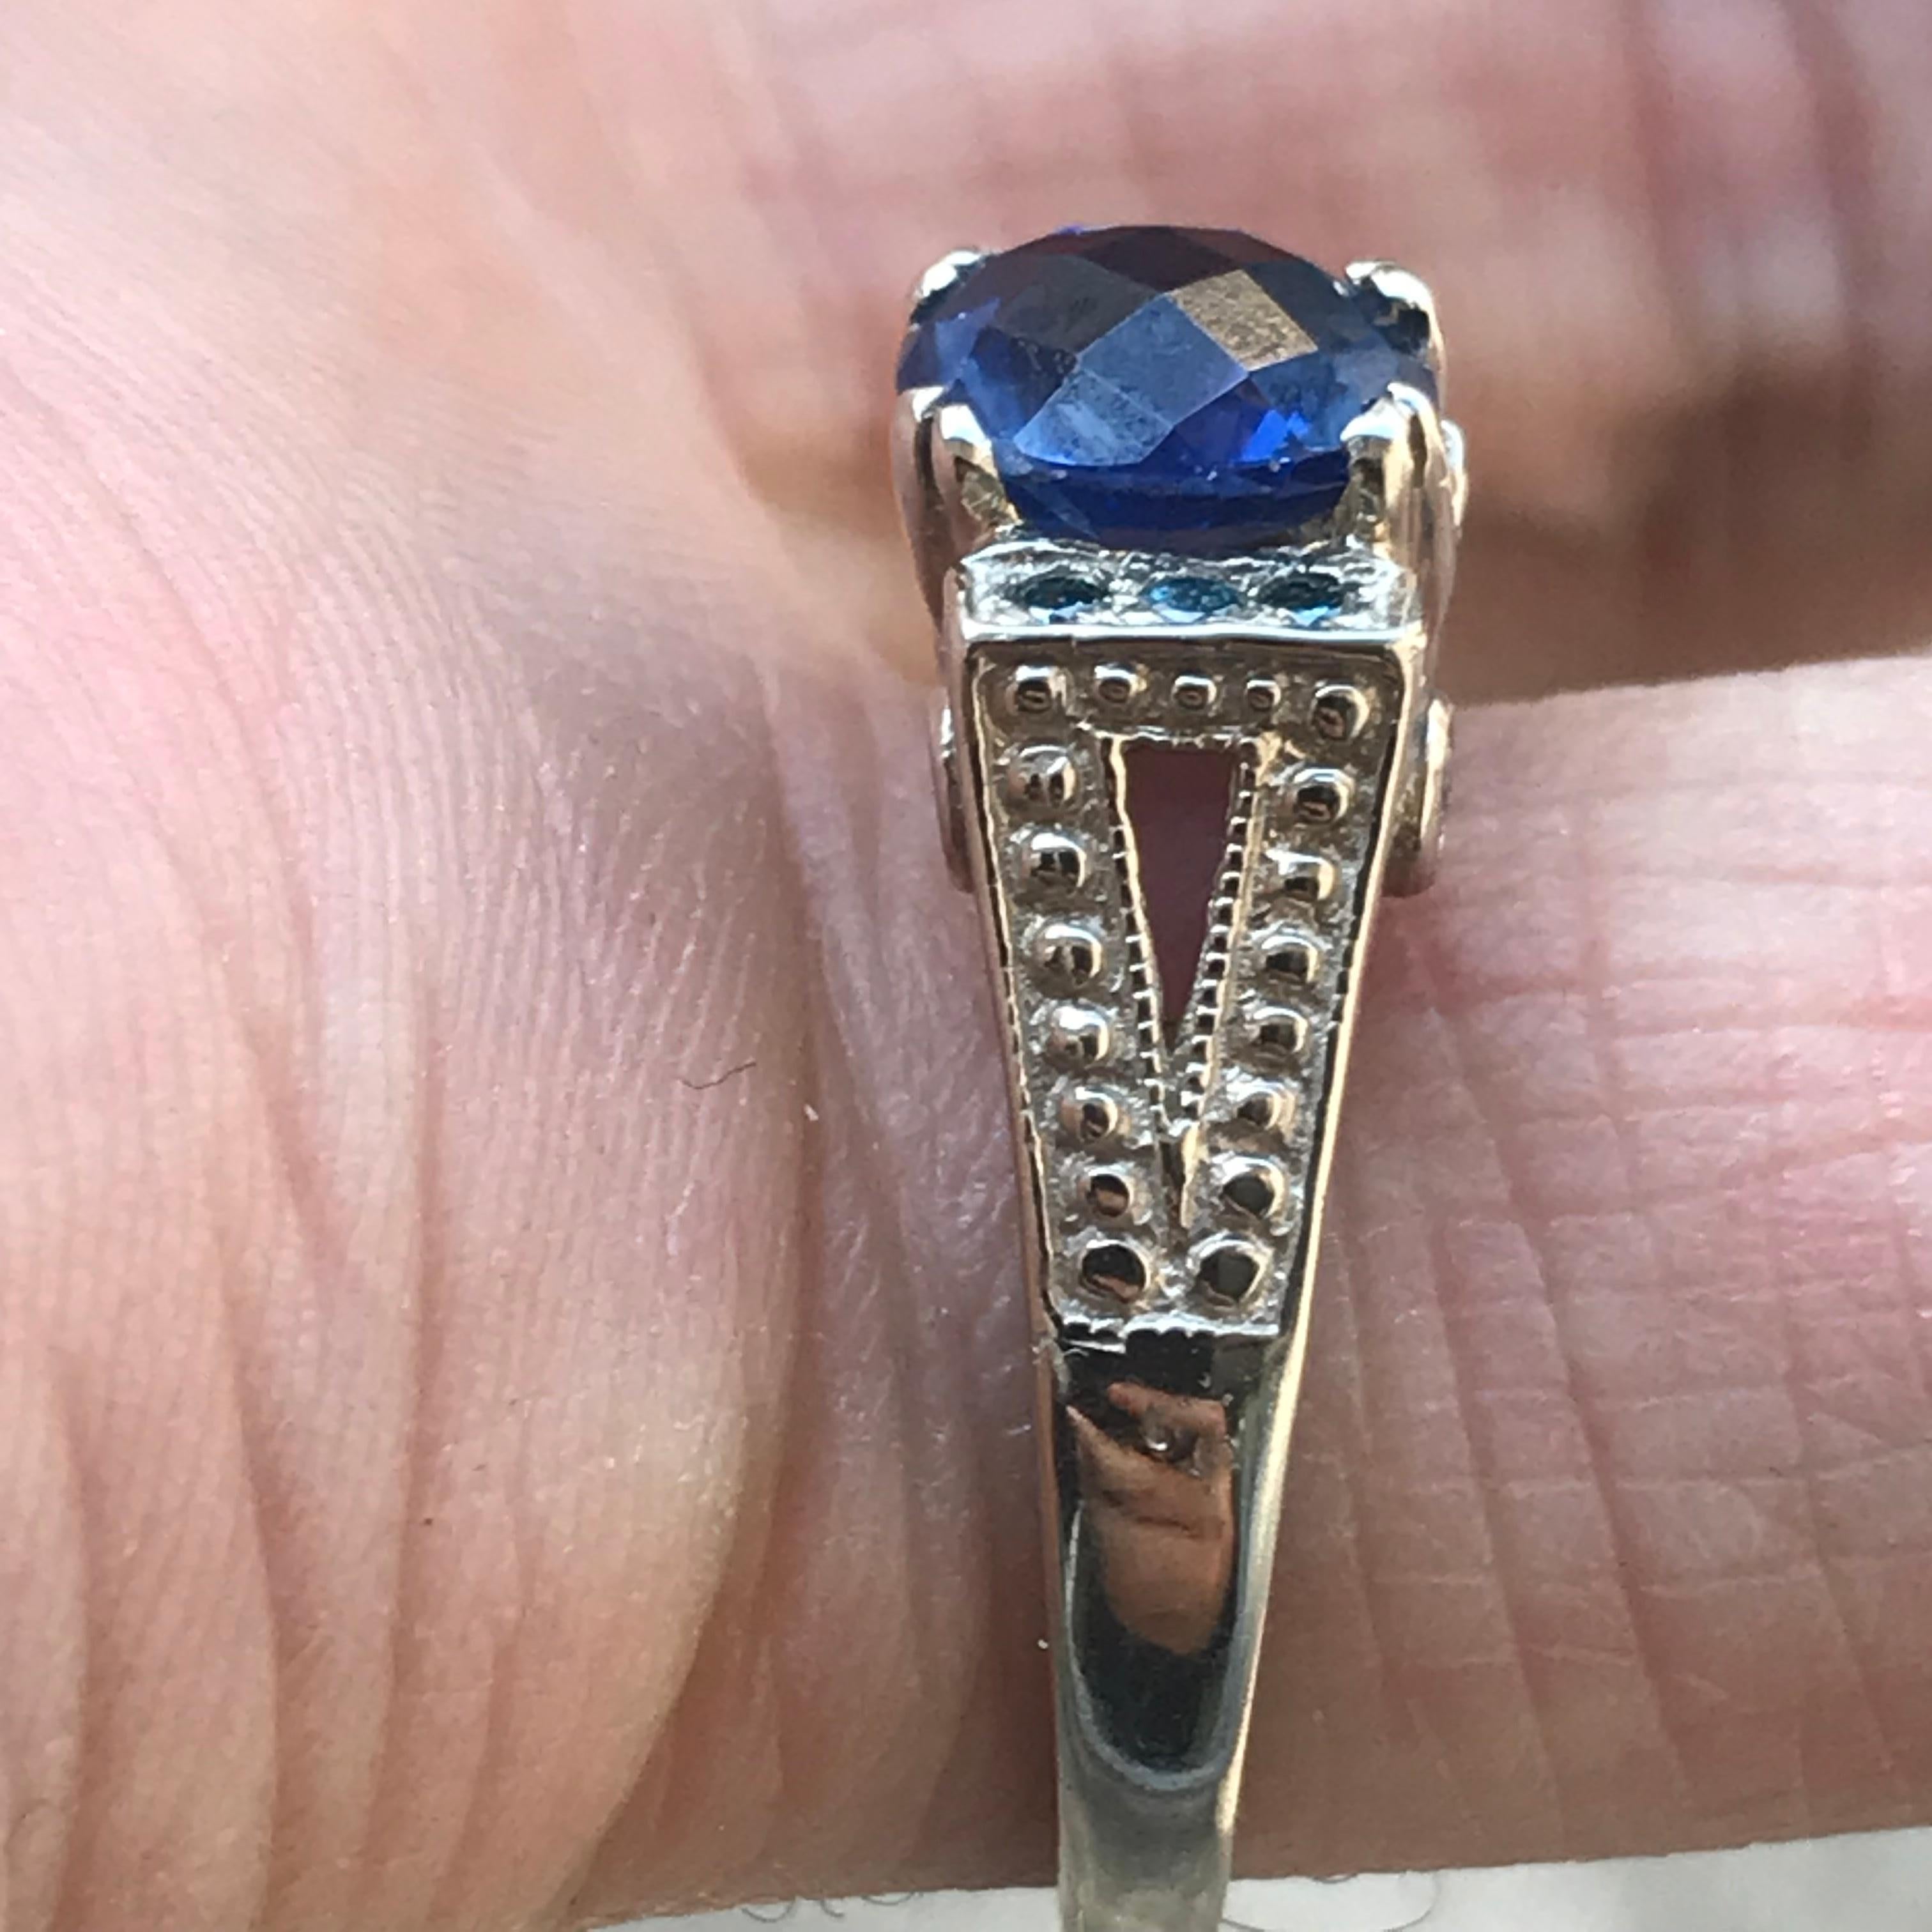 2.0 Carat Approximate Checker Board Blue Sapphire and Diamond Ring, Ben Dannie In Excellent Condition For Sale In West Hollywood, CA